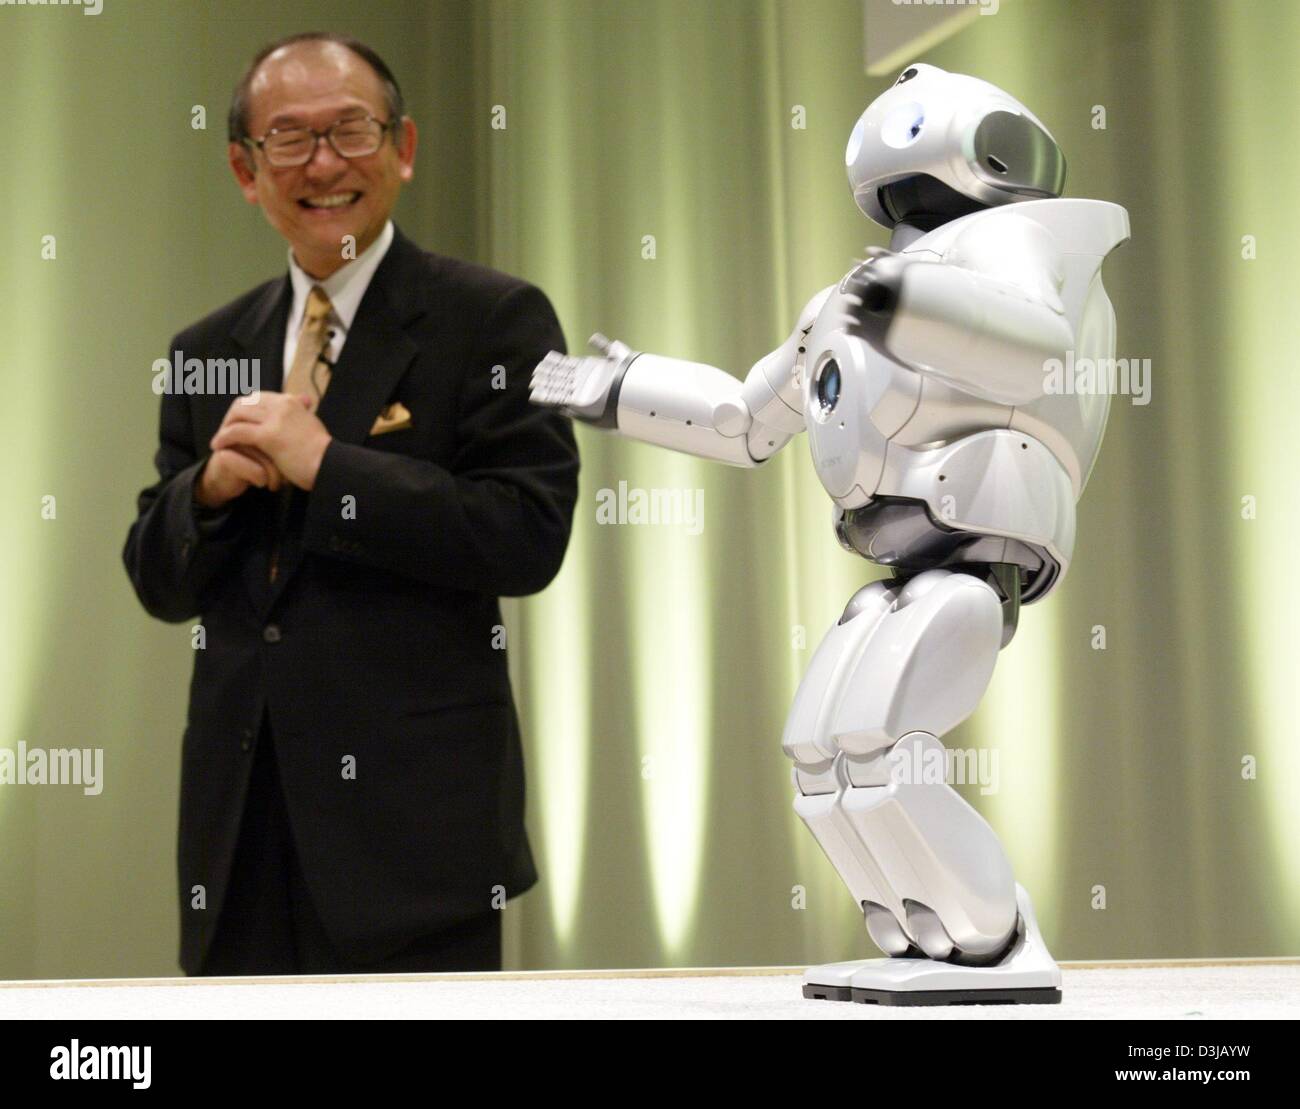 (dpa) - Kunitake Ando, President of Sony, stands next to the talking robot 'Qrio' during a press conference one day prior to the opening of the world's largest computer trade fair CeBit in Hanover, Germany, on Wednesday, 17 March 2004. 6,411 exhibitors and 500,000 visitors are expected to attend the fair which will run for seven days from 18 March. Stock Photo